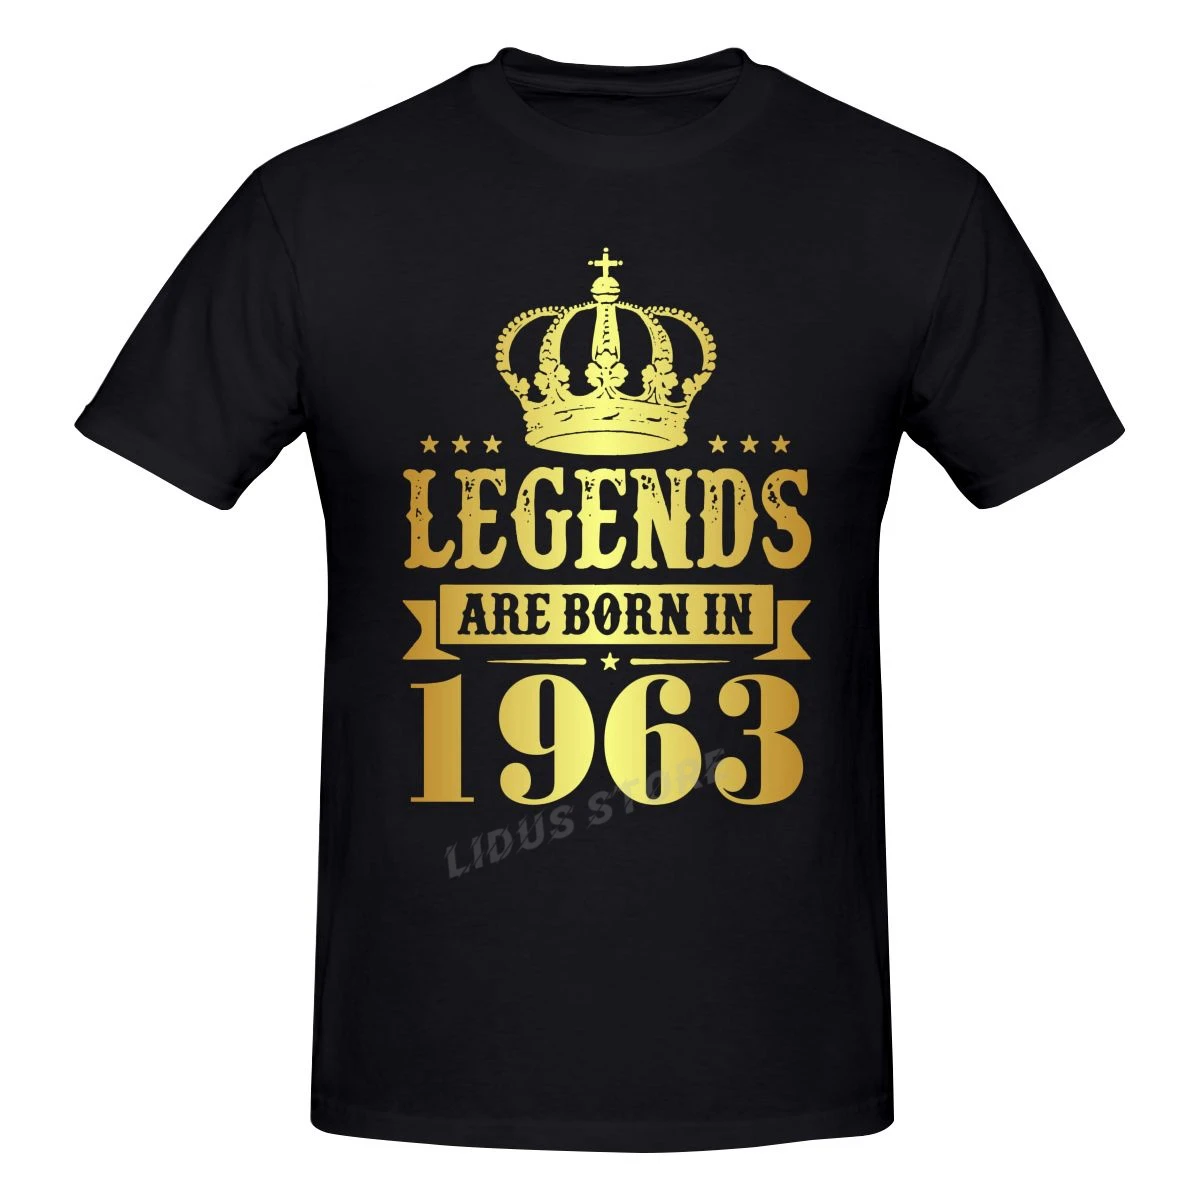 

Legends Are Born In 1963 59 Years For 59th Birthday Gift T shirts Harajuku Short Sleeve T-shirt Graphics Tshirt Brands Tee Tops